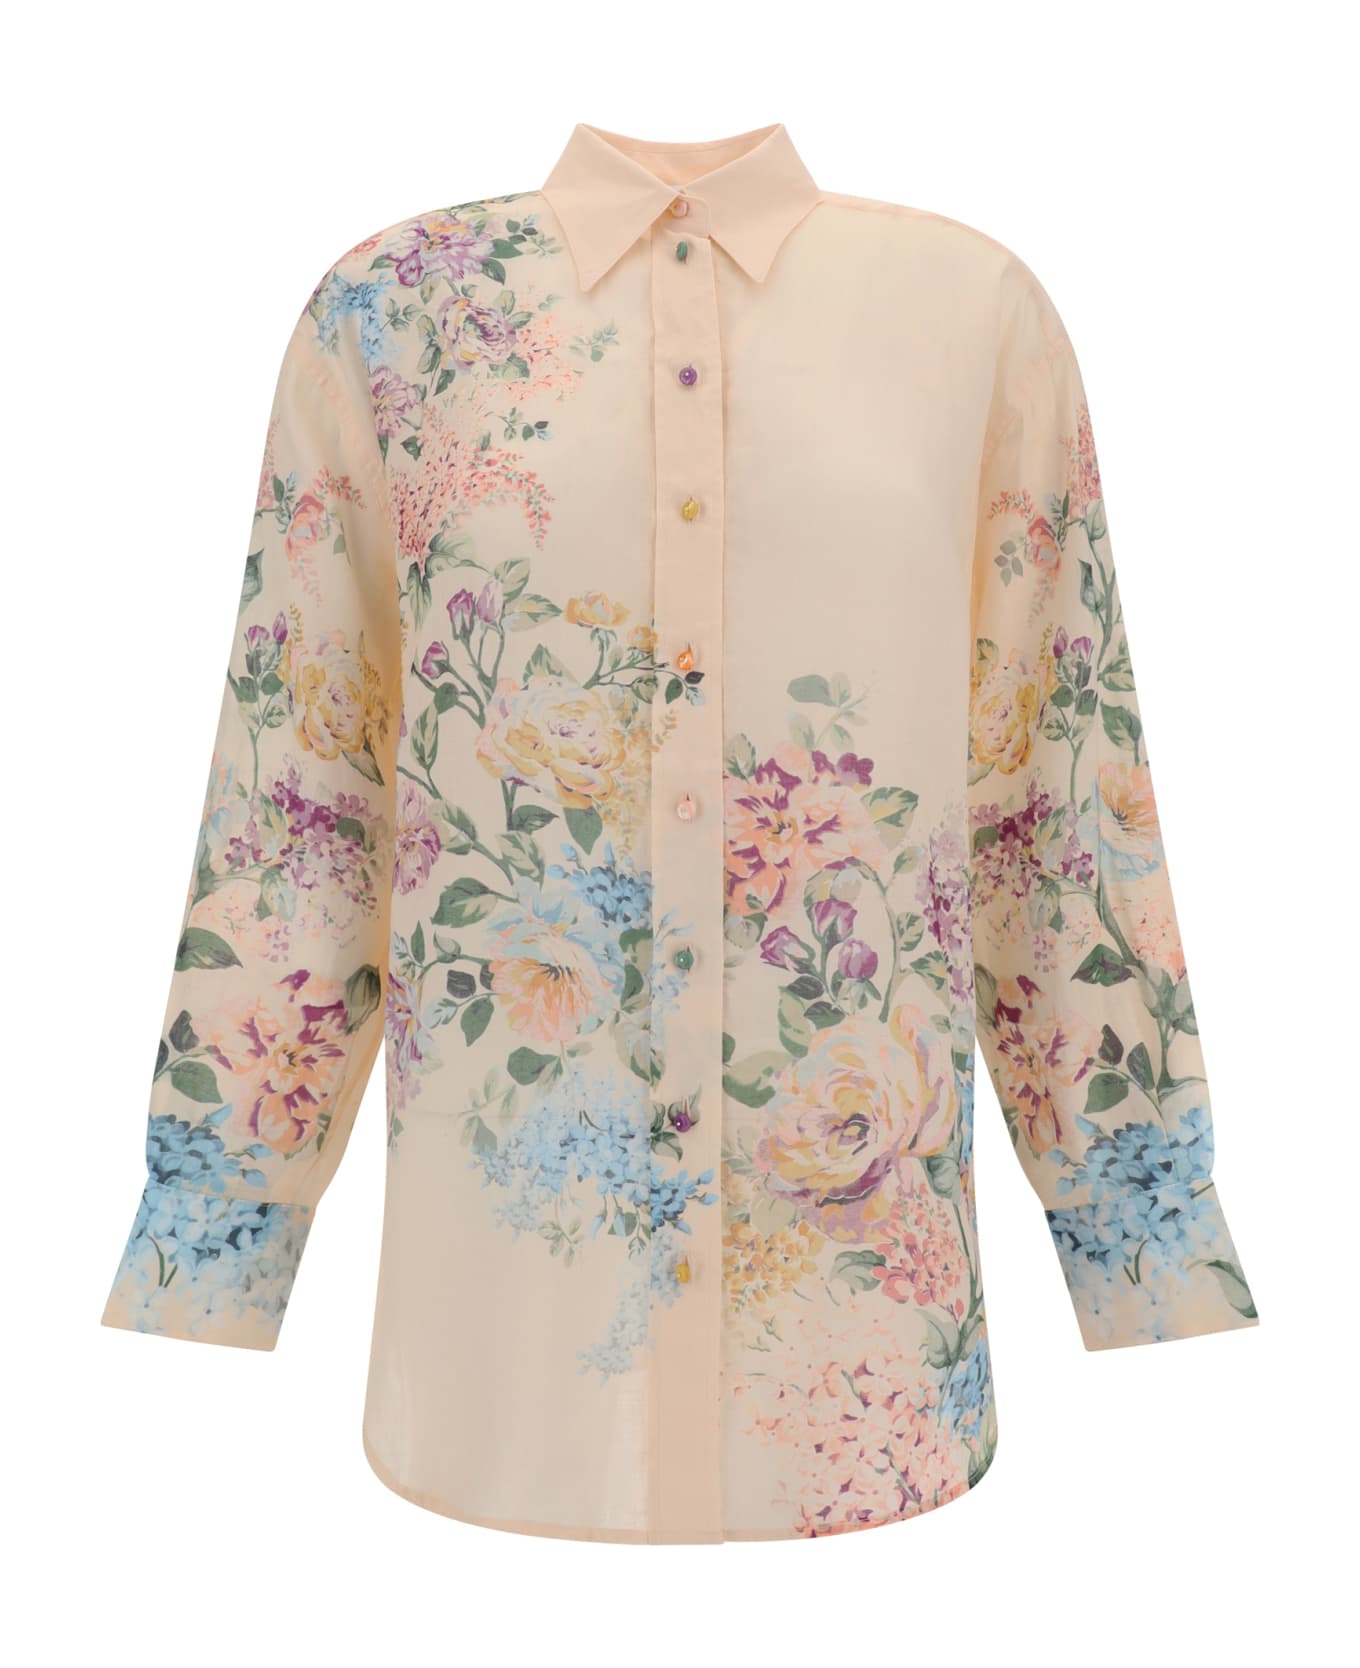 Zimmermann Halliday Relaxed Shirt - Cream Watercolour Floral ブラウス